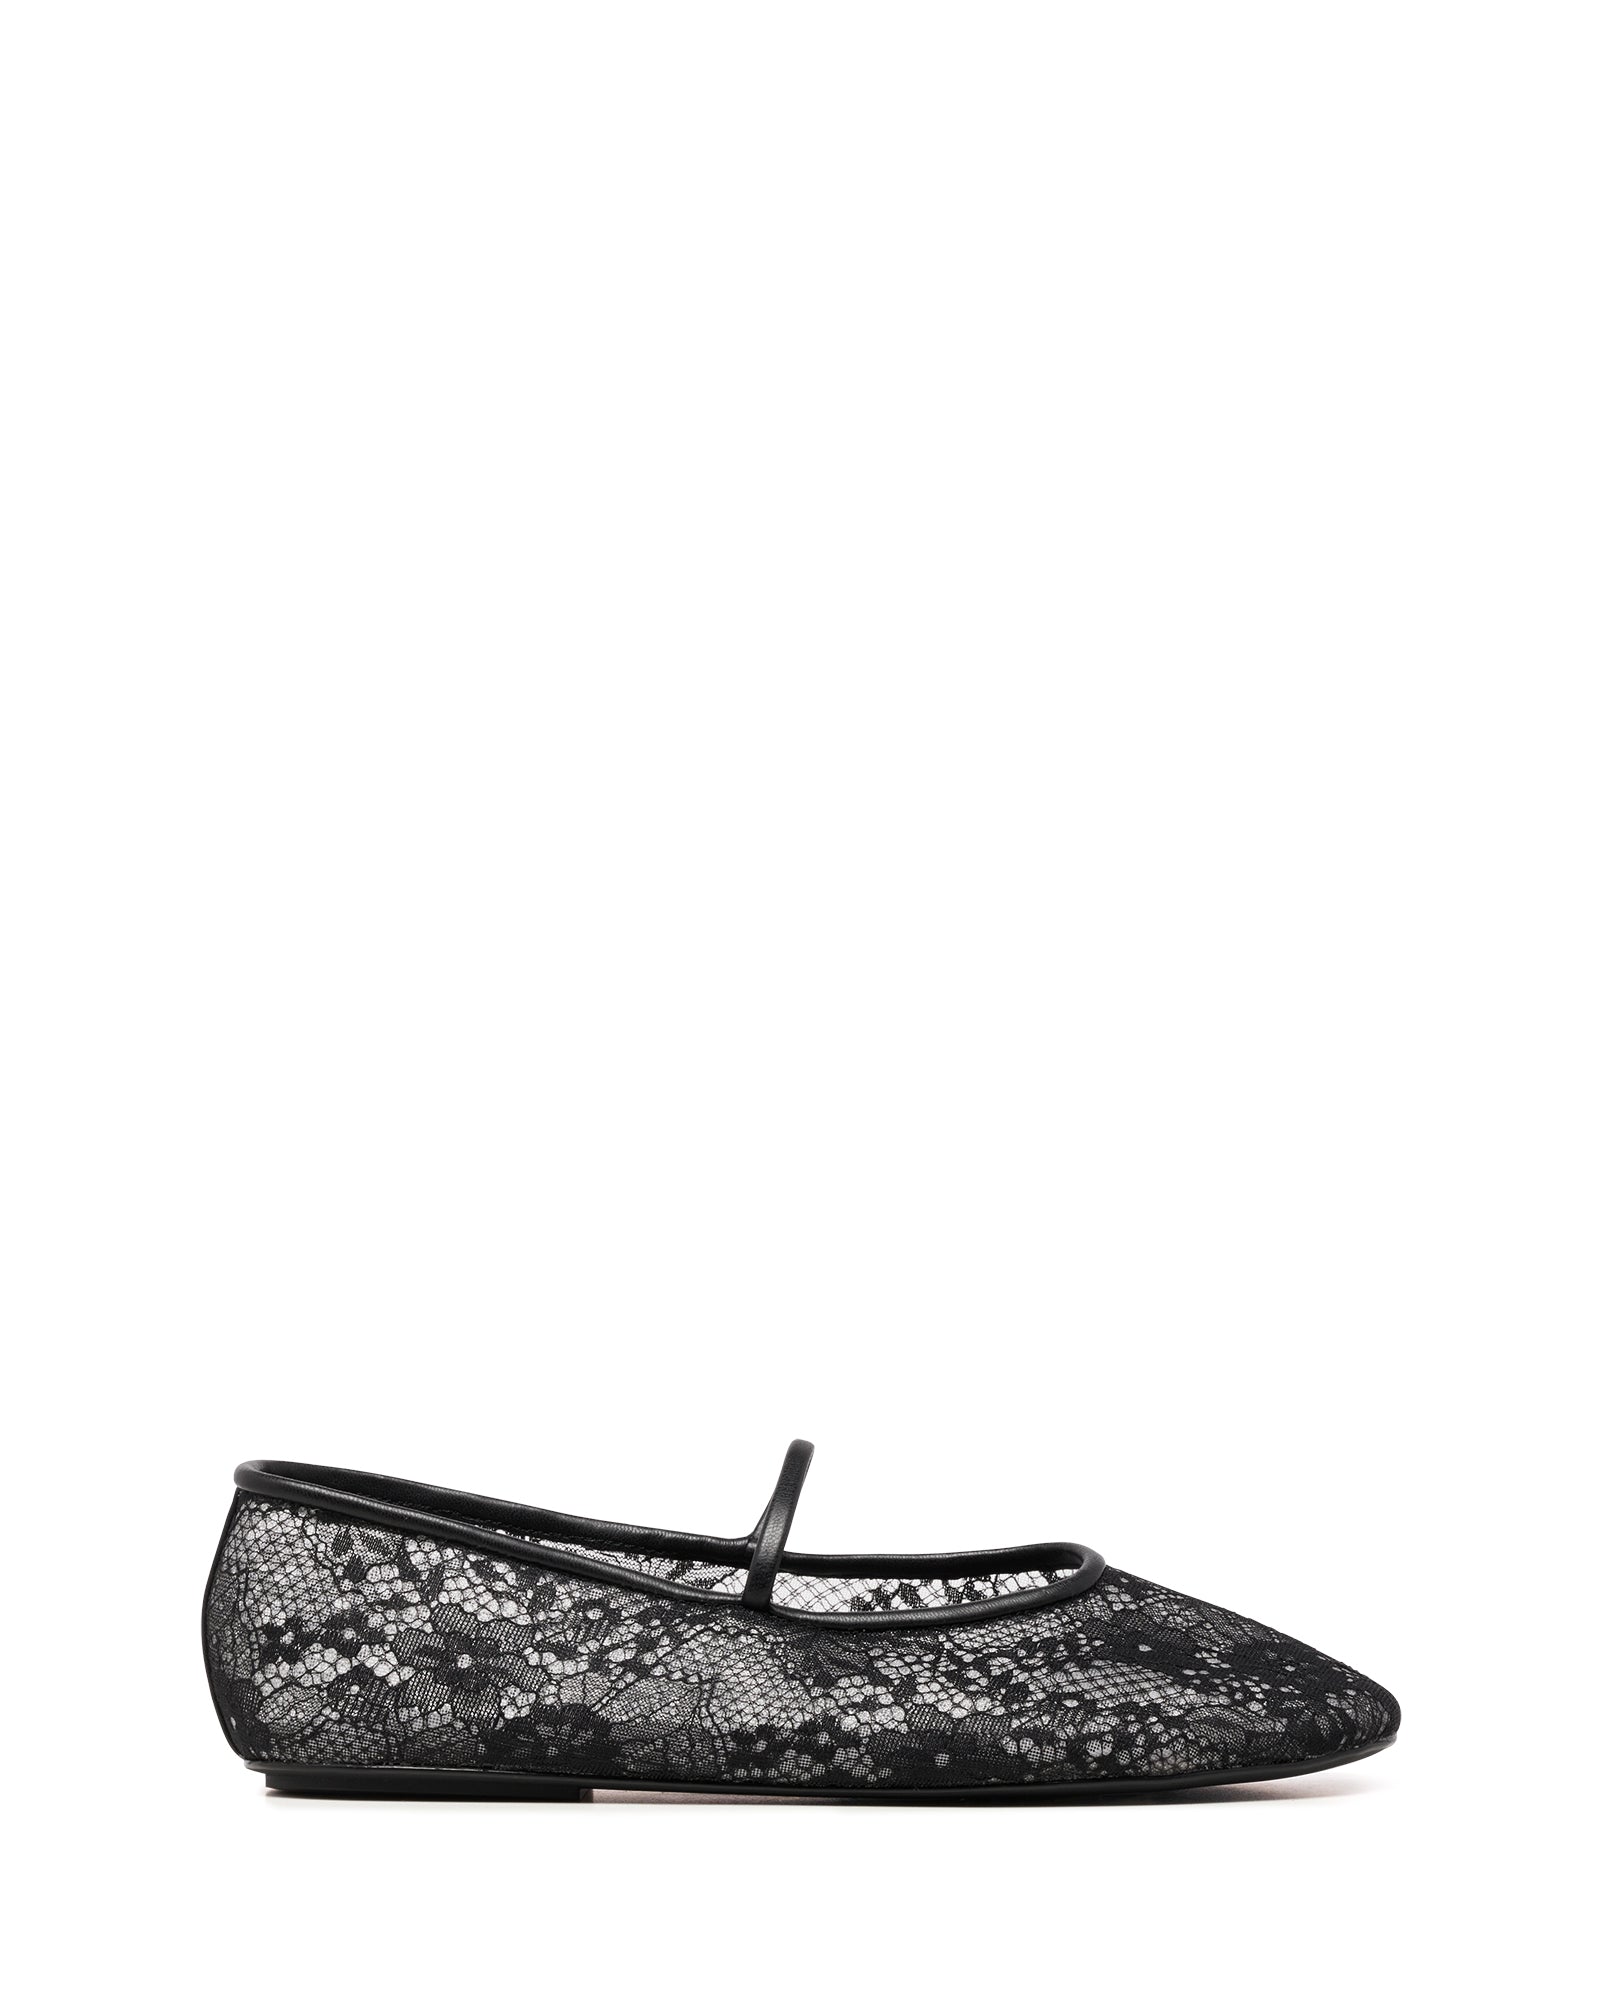 Therapy Shoes Monamour Black Lace Fabric | Women's Flats | Ballet 